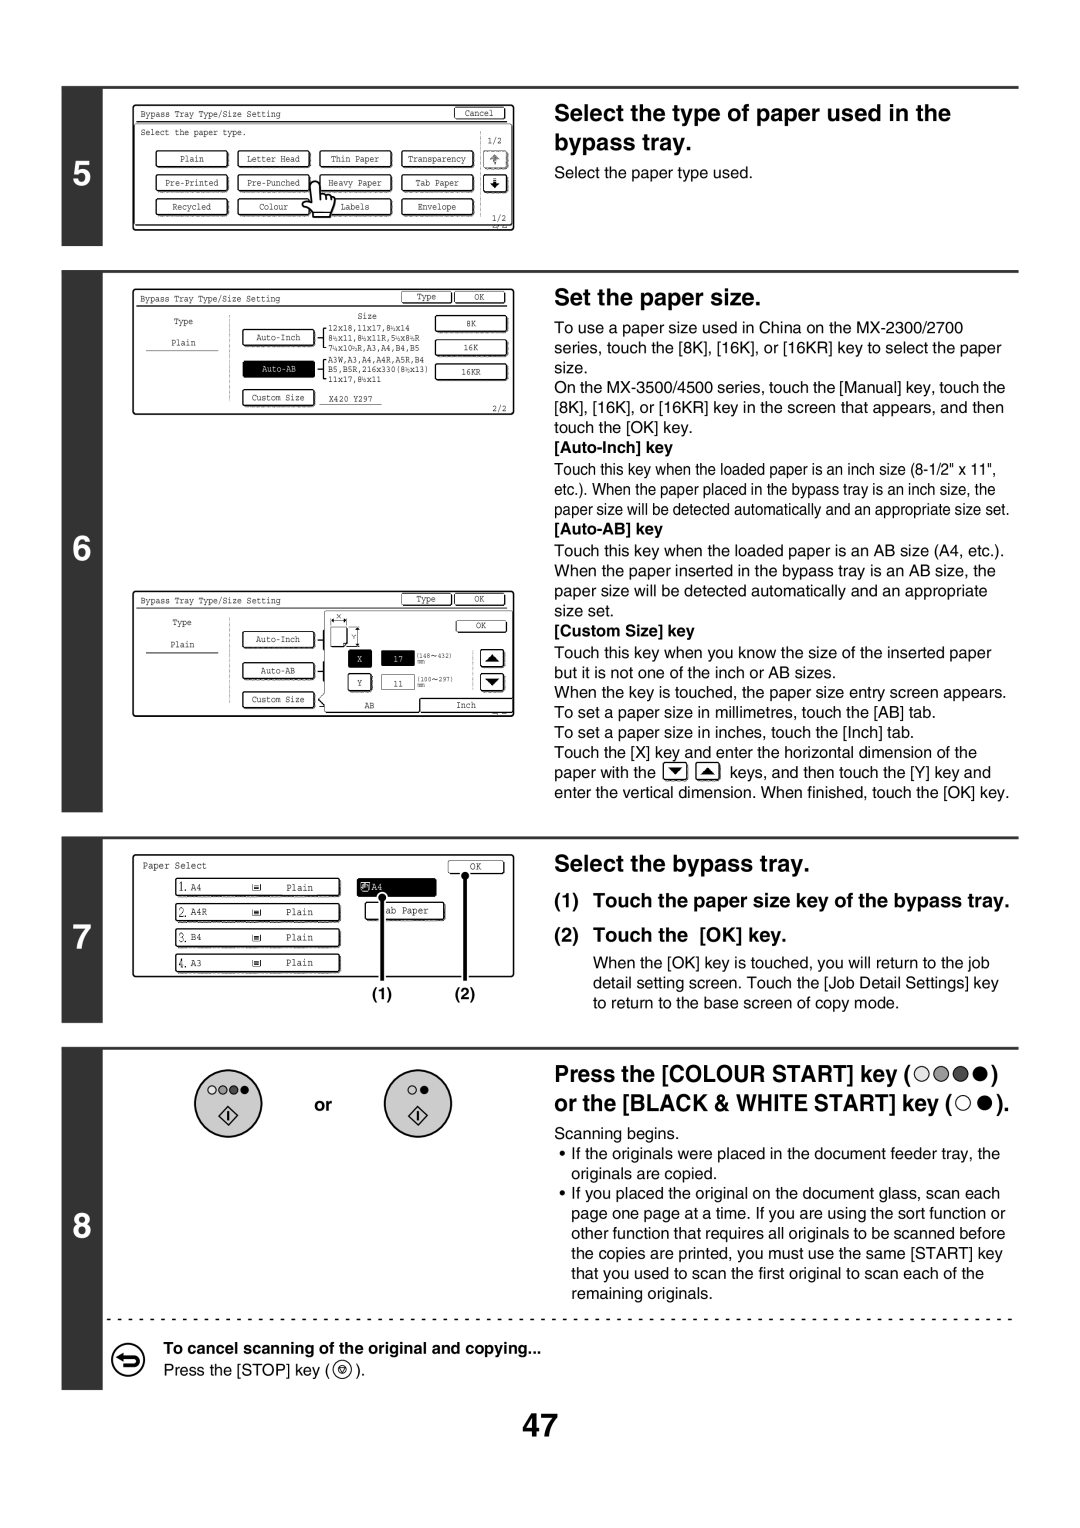 Sharp MX-4501N Select the type of paper used in the bypass tray, Select the bypass tray, Set the paper size, Auto-Inch key 